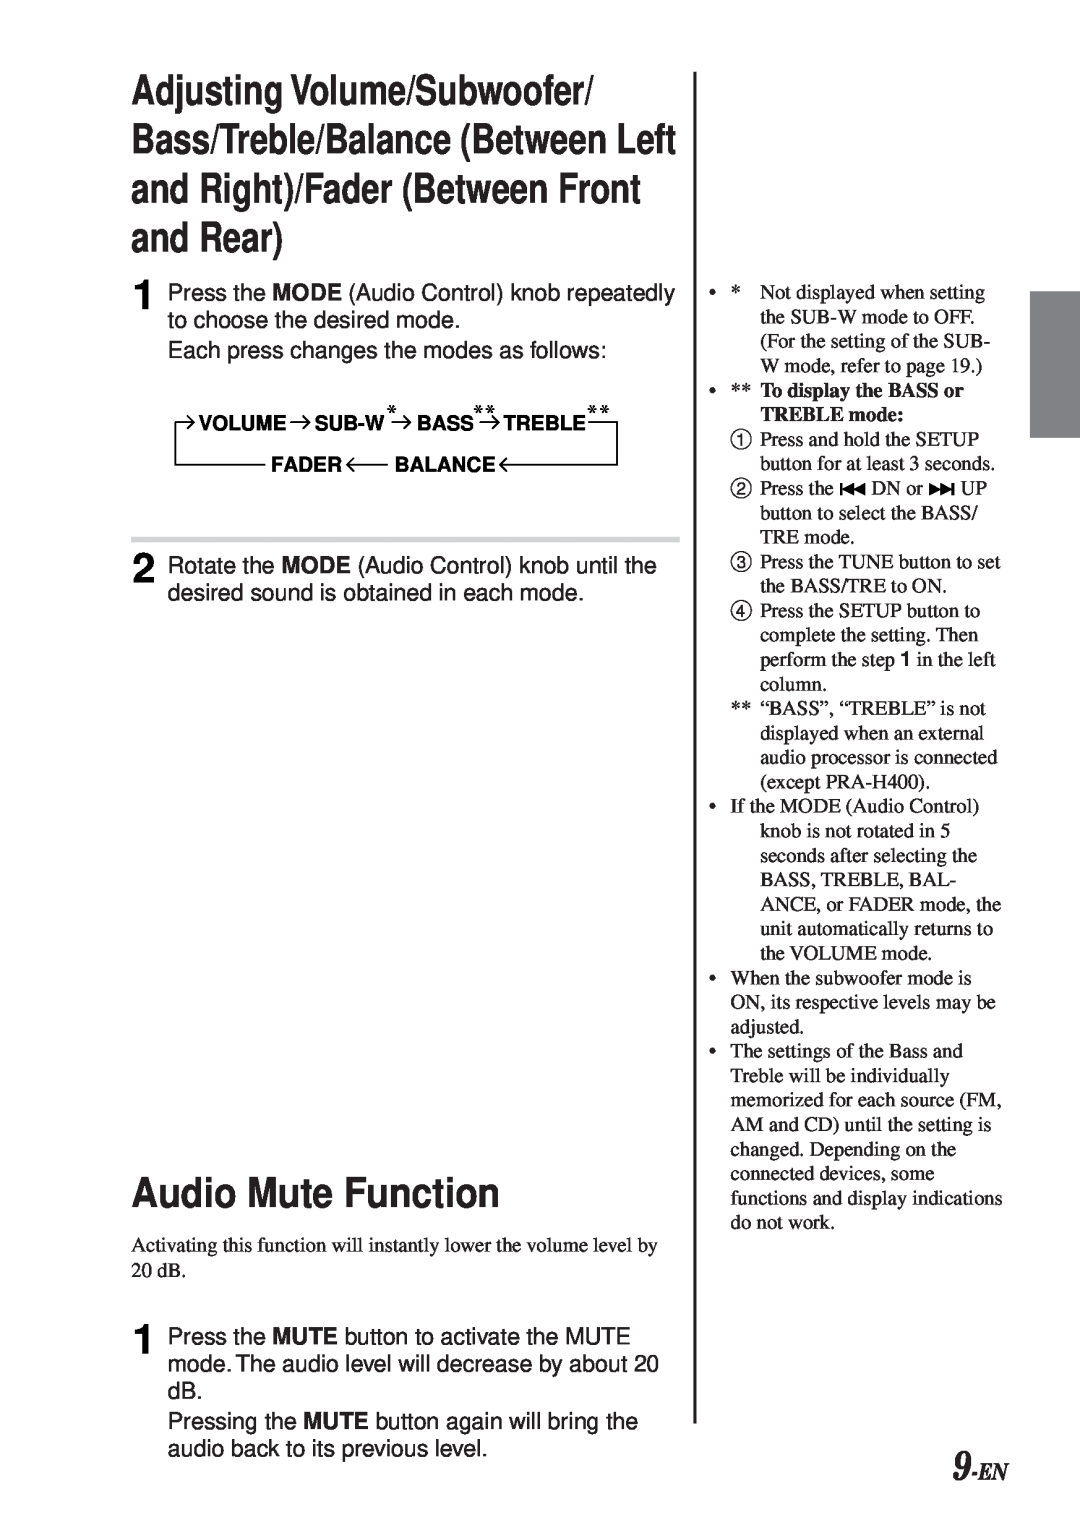 Alpine CDA-7990 manual Adjusting Volume/Subwoofer, and Rear, Audio Mute Function, and Right/Fader Between Front, 9-EN 